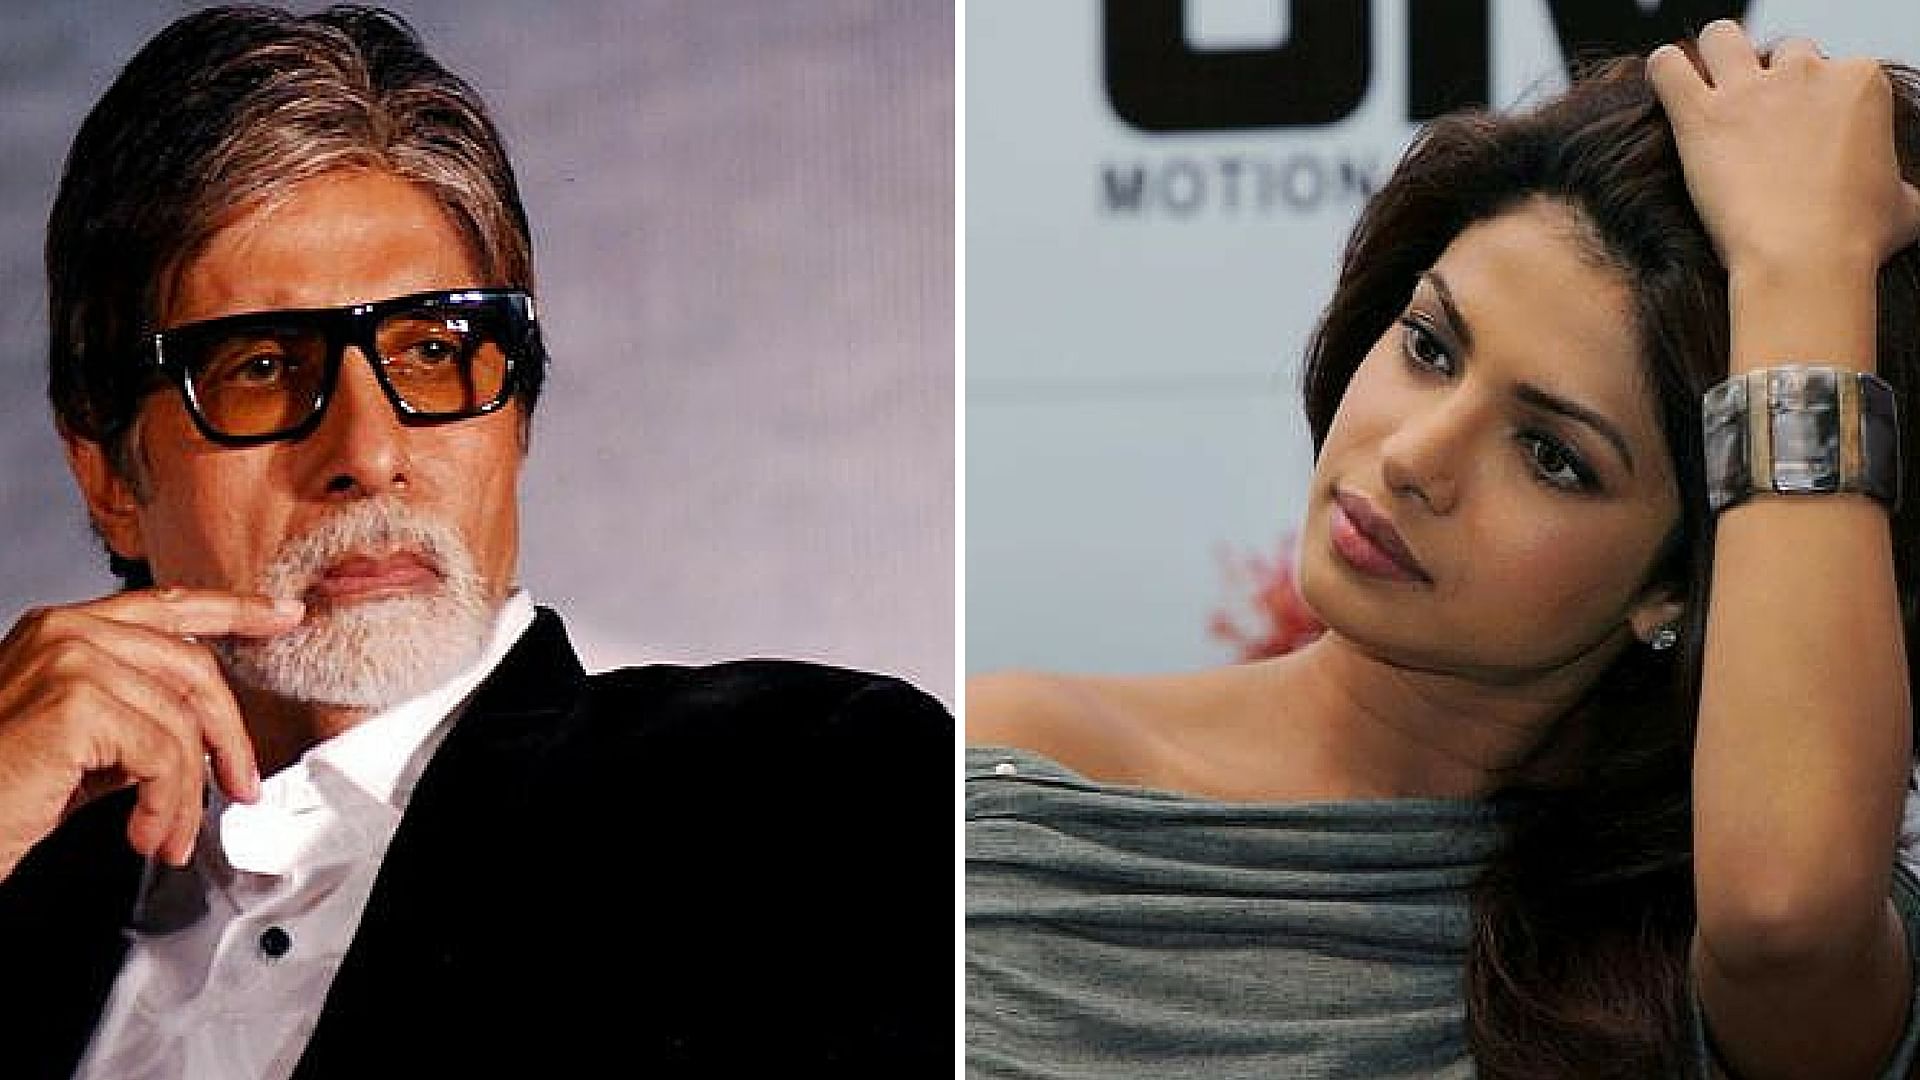 Amitabh Bachchan and Priyanka Chopra will not charge for being a part of this campaign. (Photo: <b>The Quint</b>)